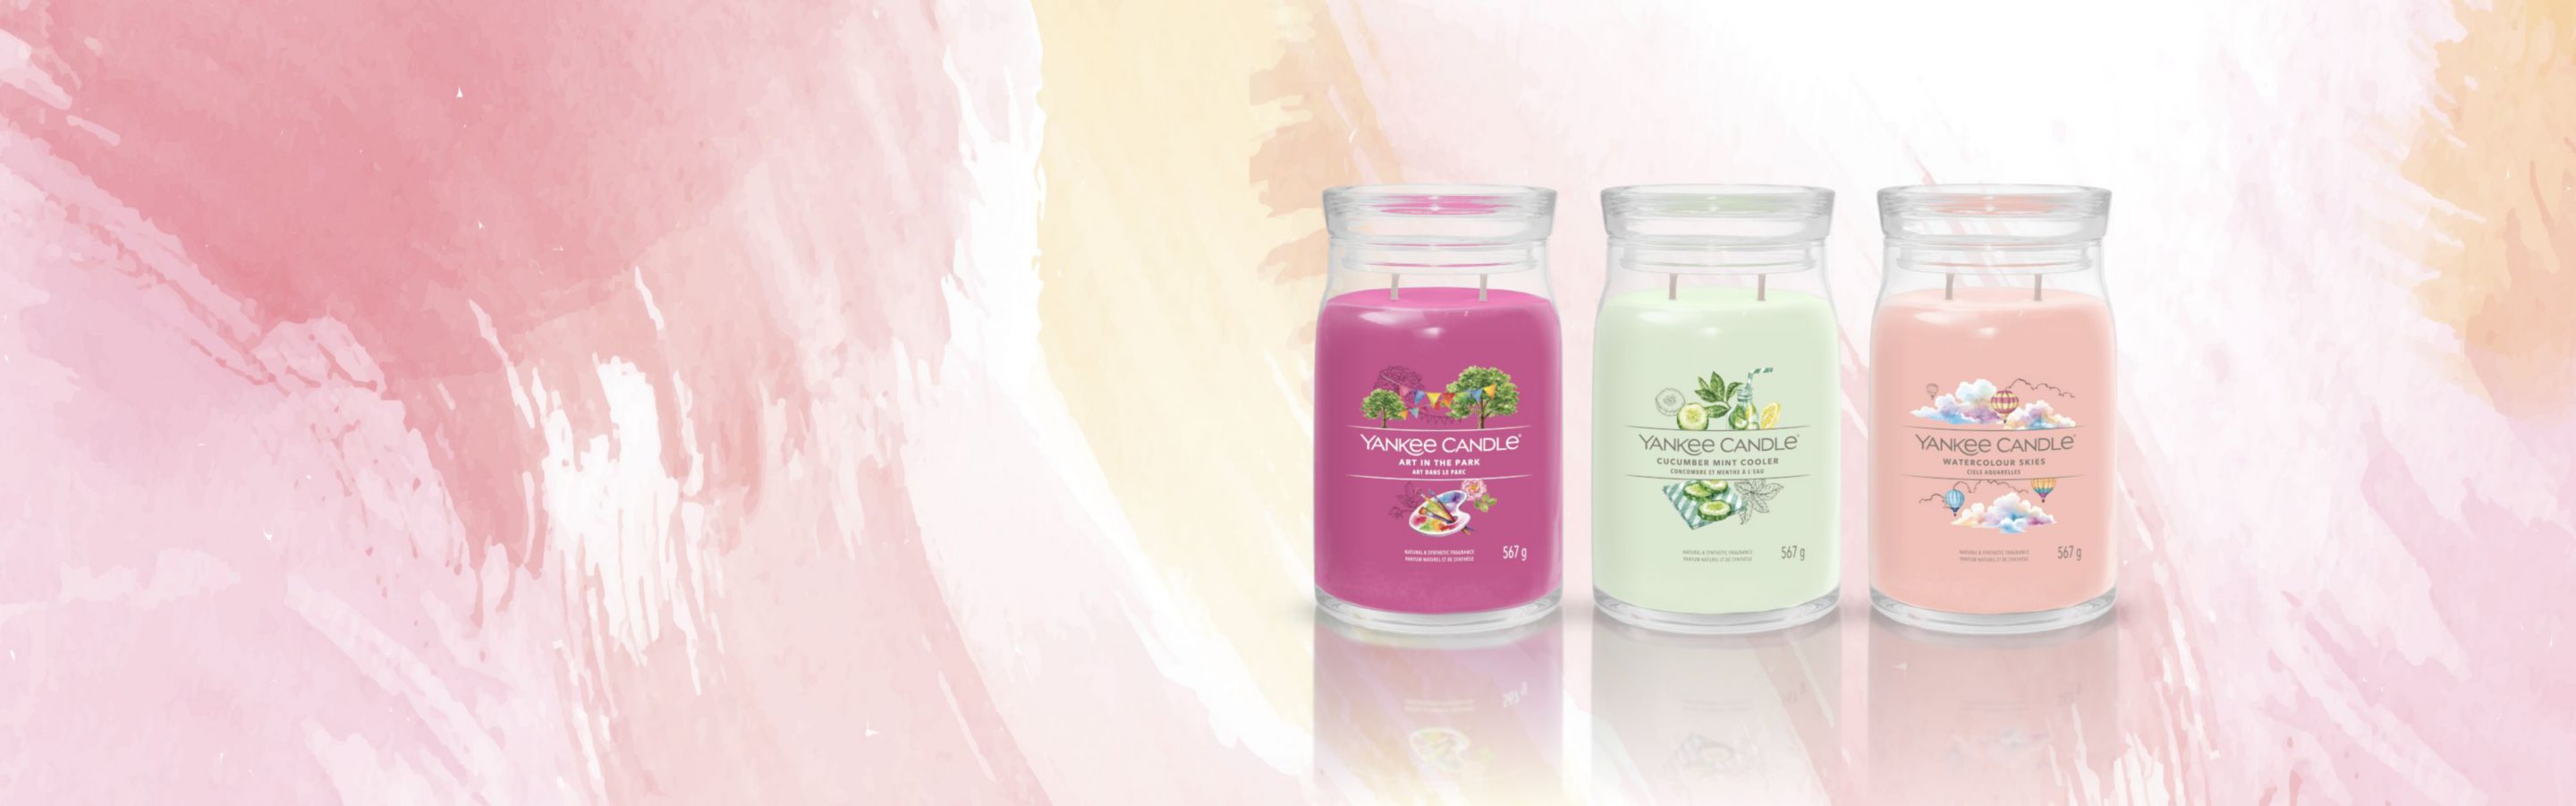 yankee candle lineup including two wick fuchsia, light green, and light pink scented candles